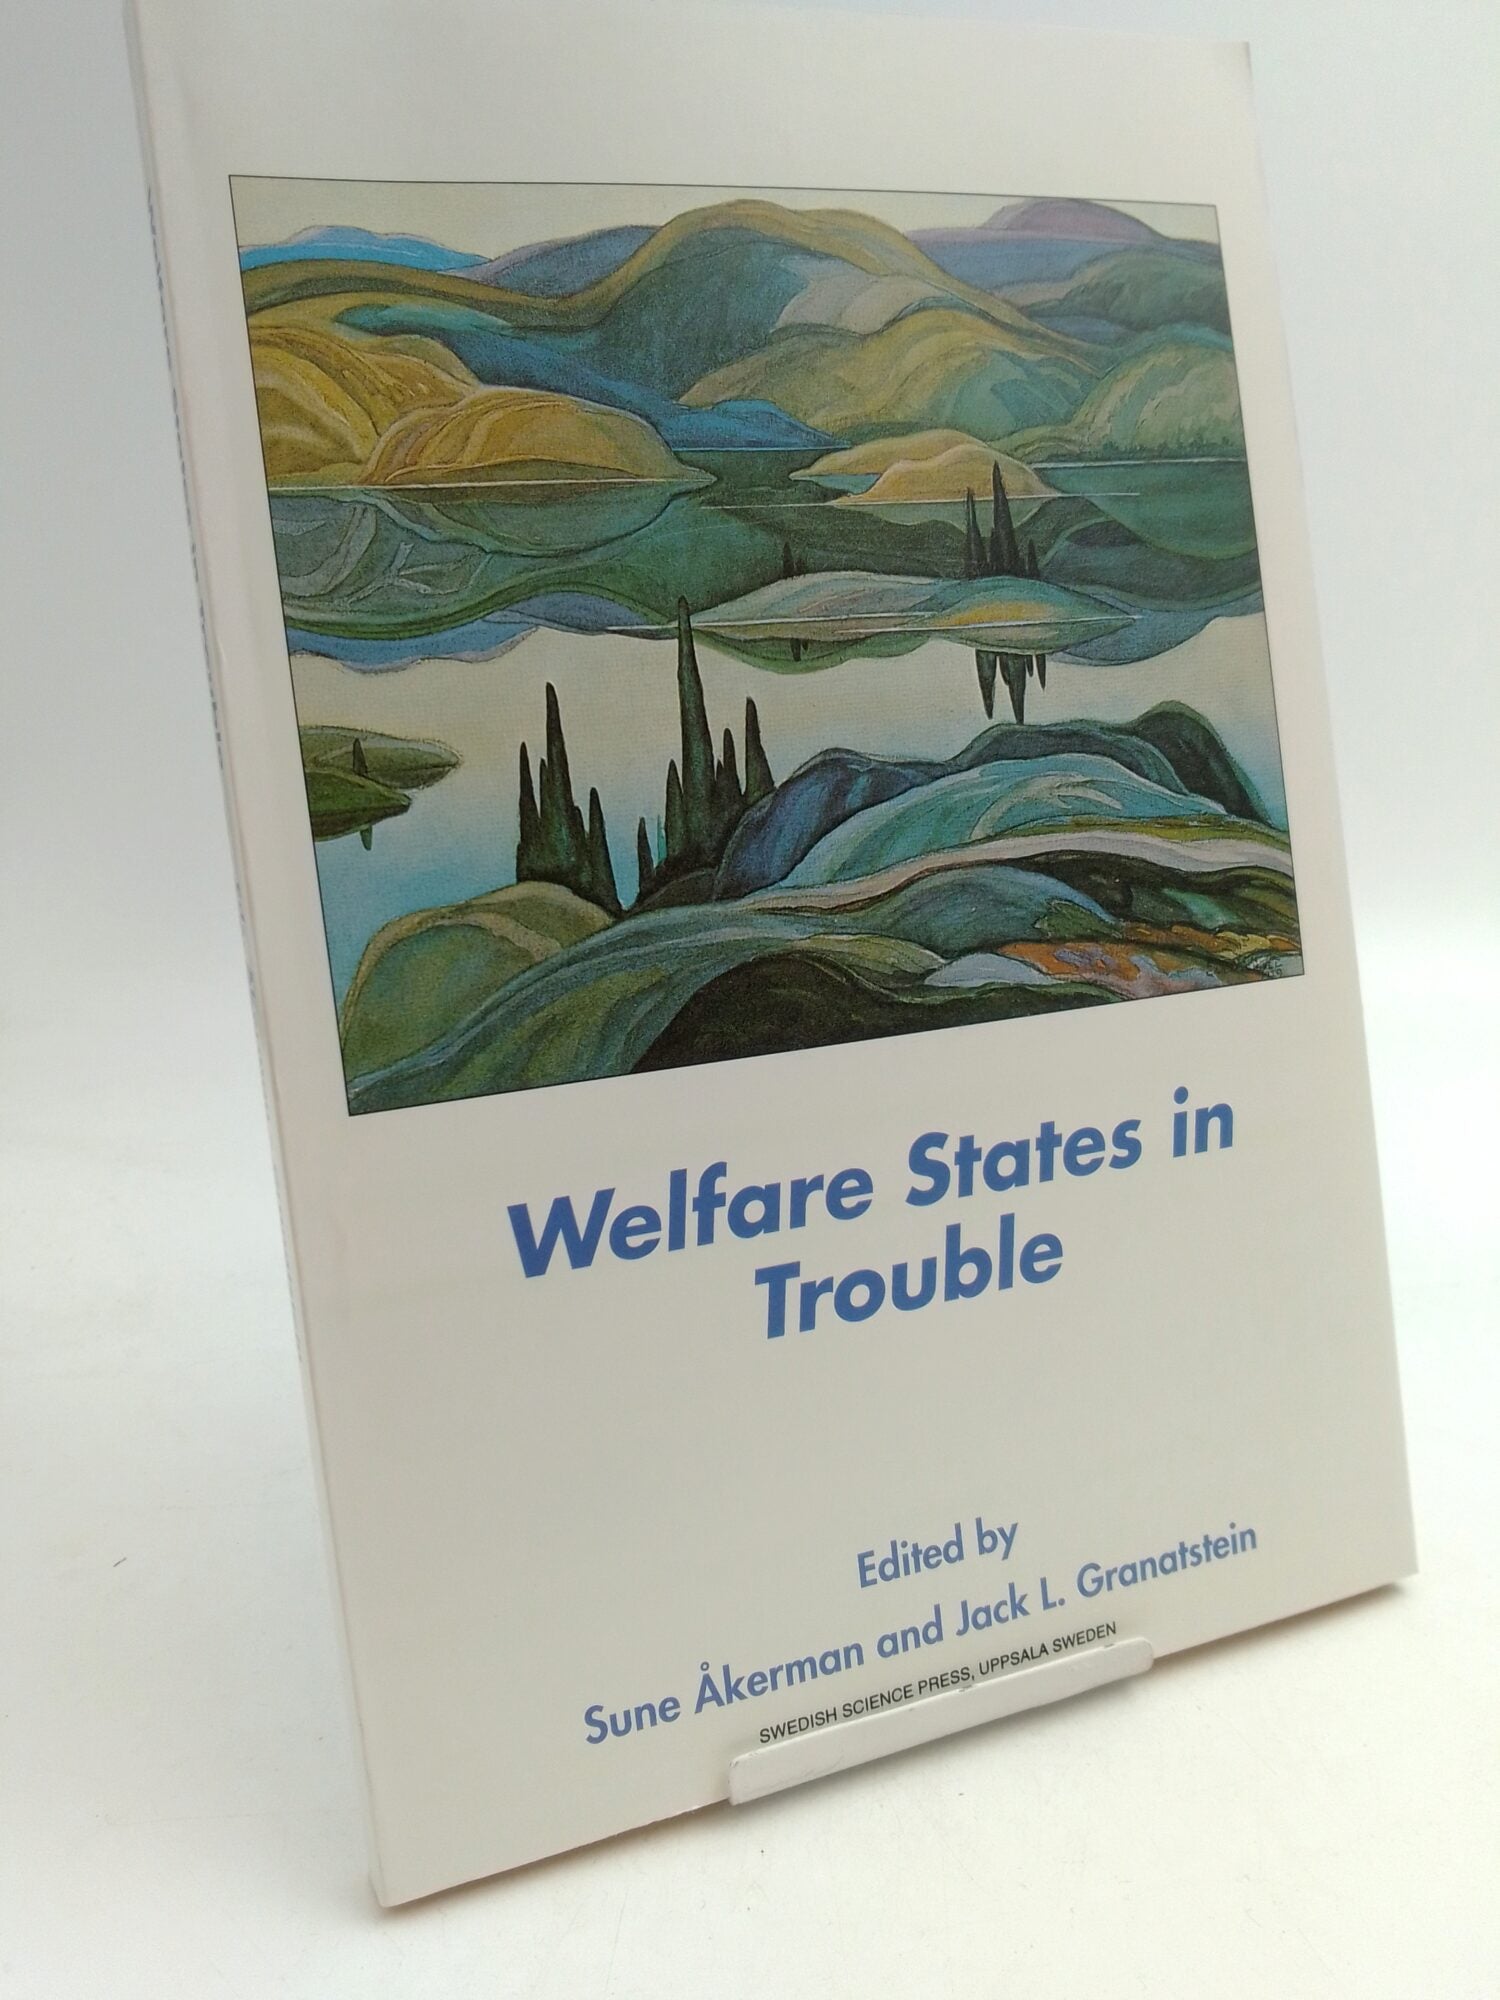 Åkerman, Sune | Granatstein, Jack L. | Welfare states in trouble : Historical perspectives on Canada and Sweden